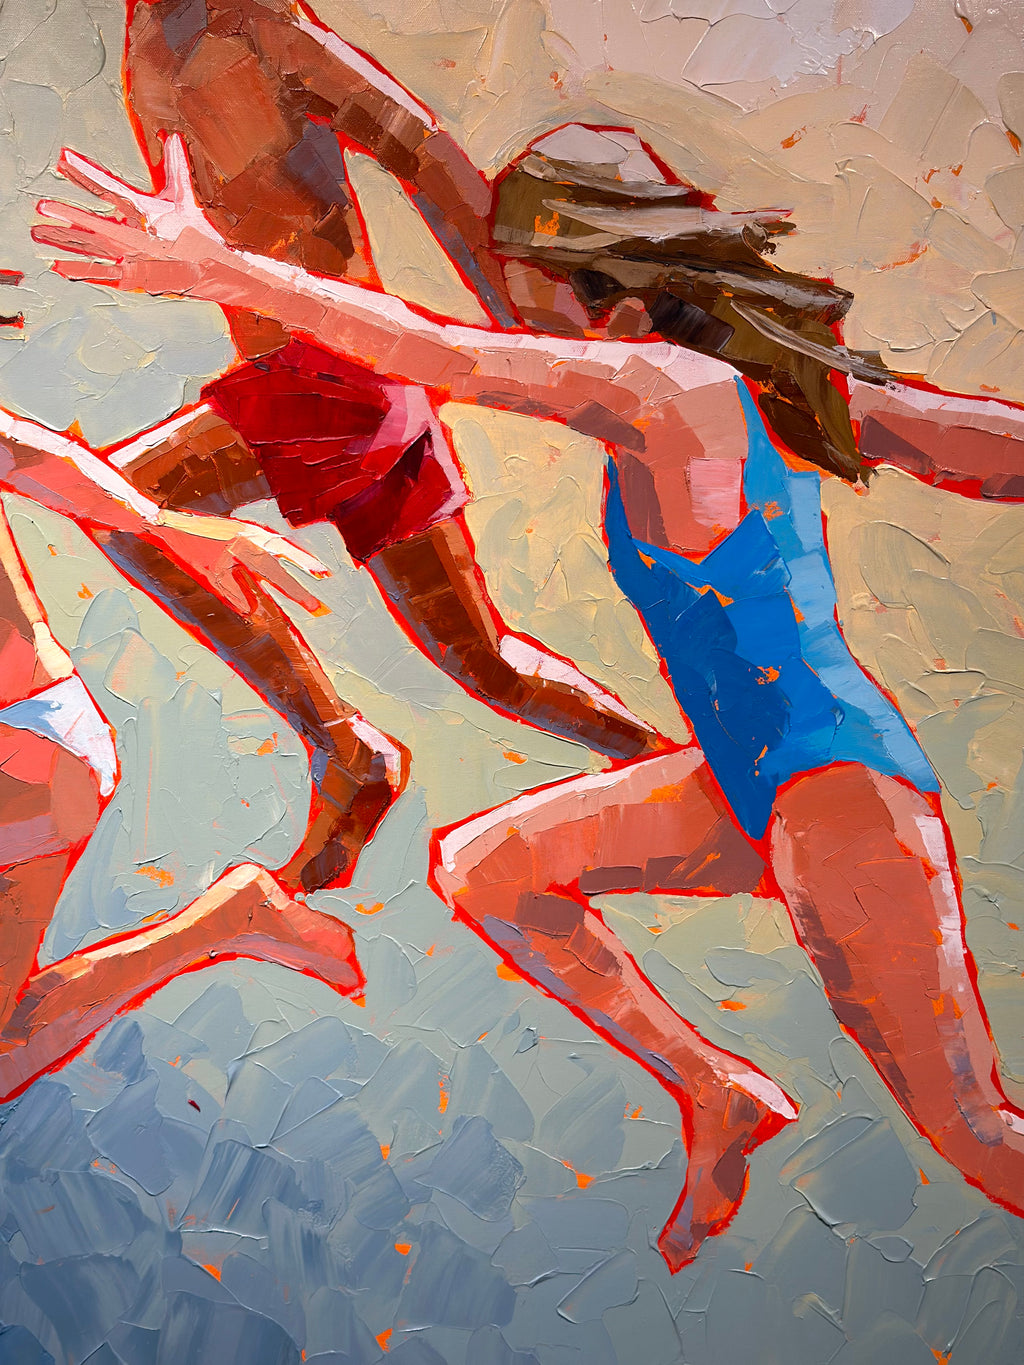 abstract figurative acrylic painting of kids in swimsuits jumping with sunshine behind